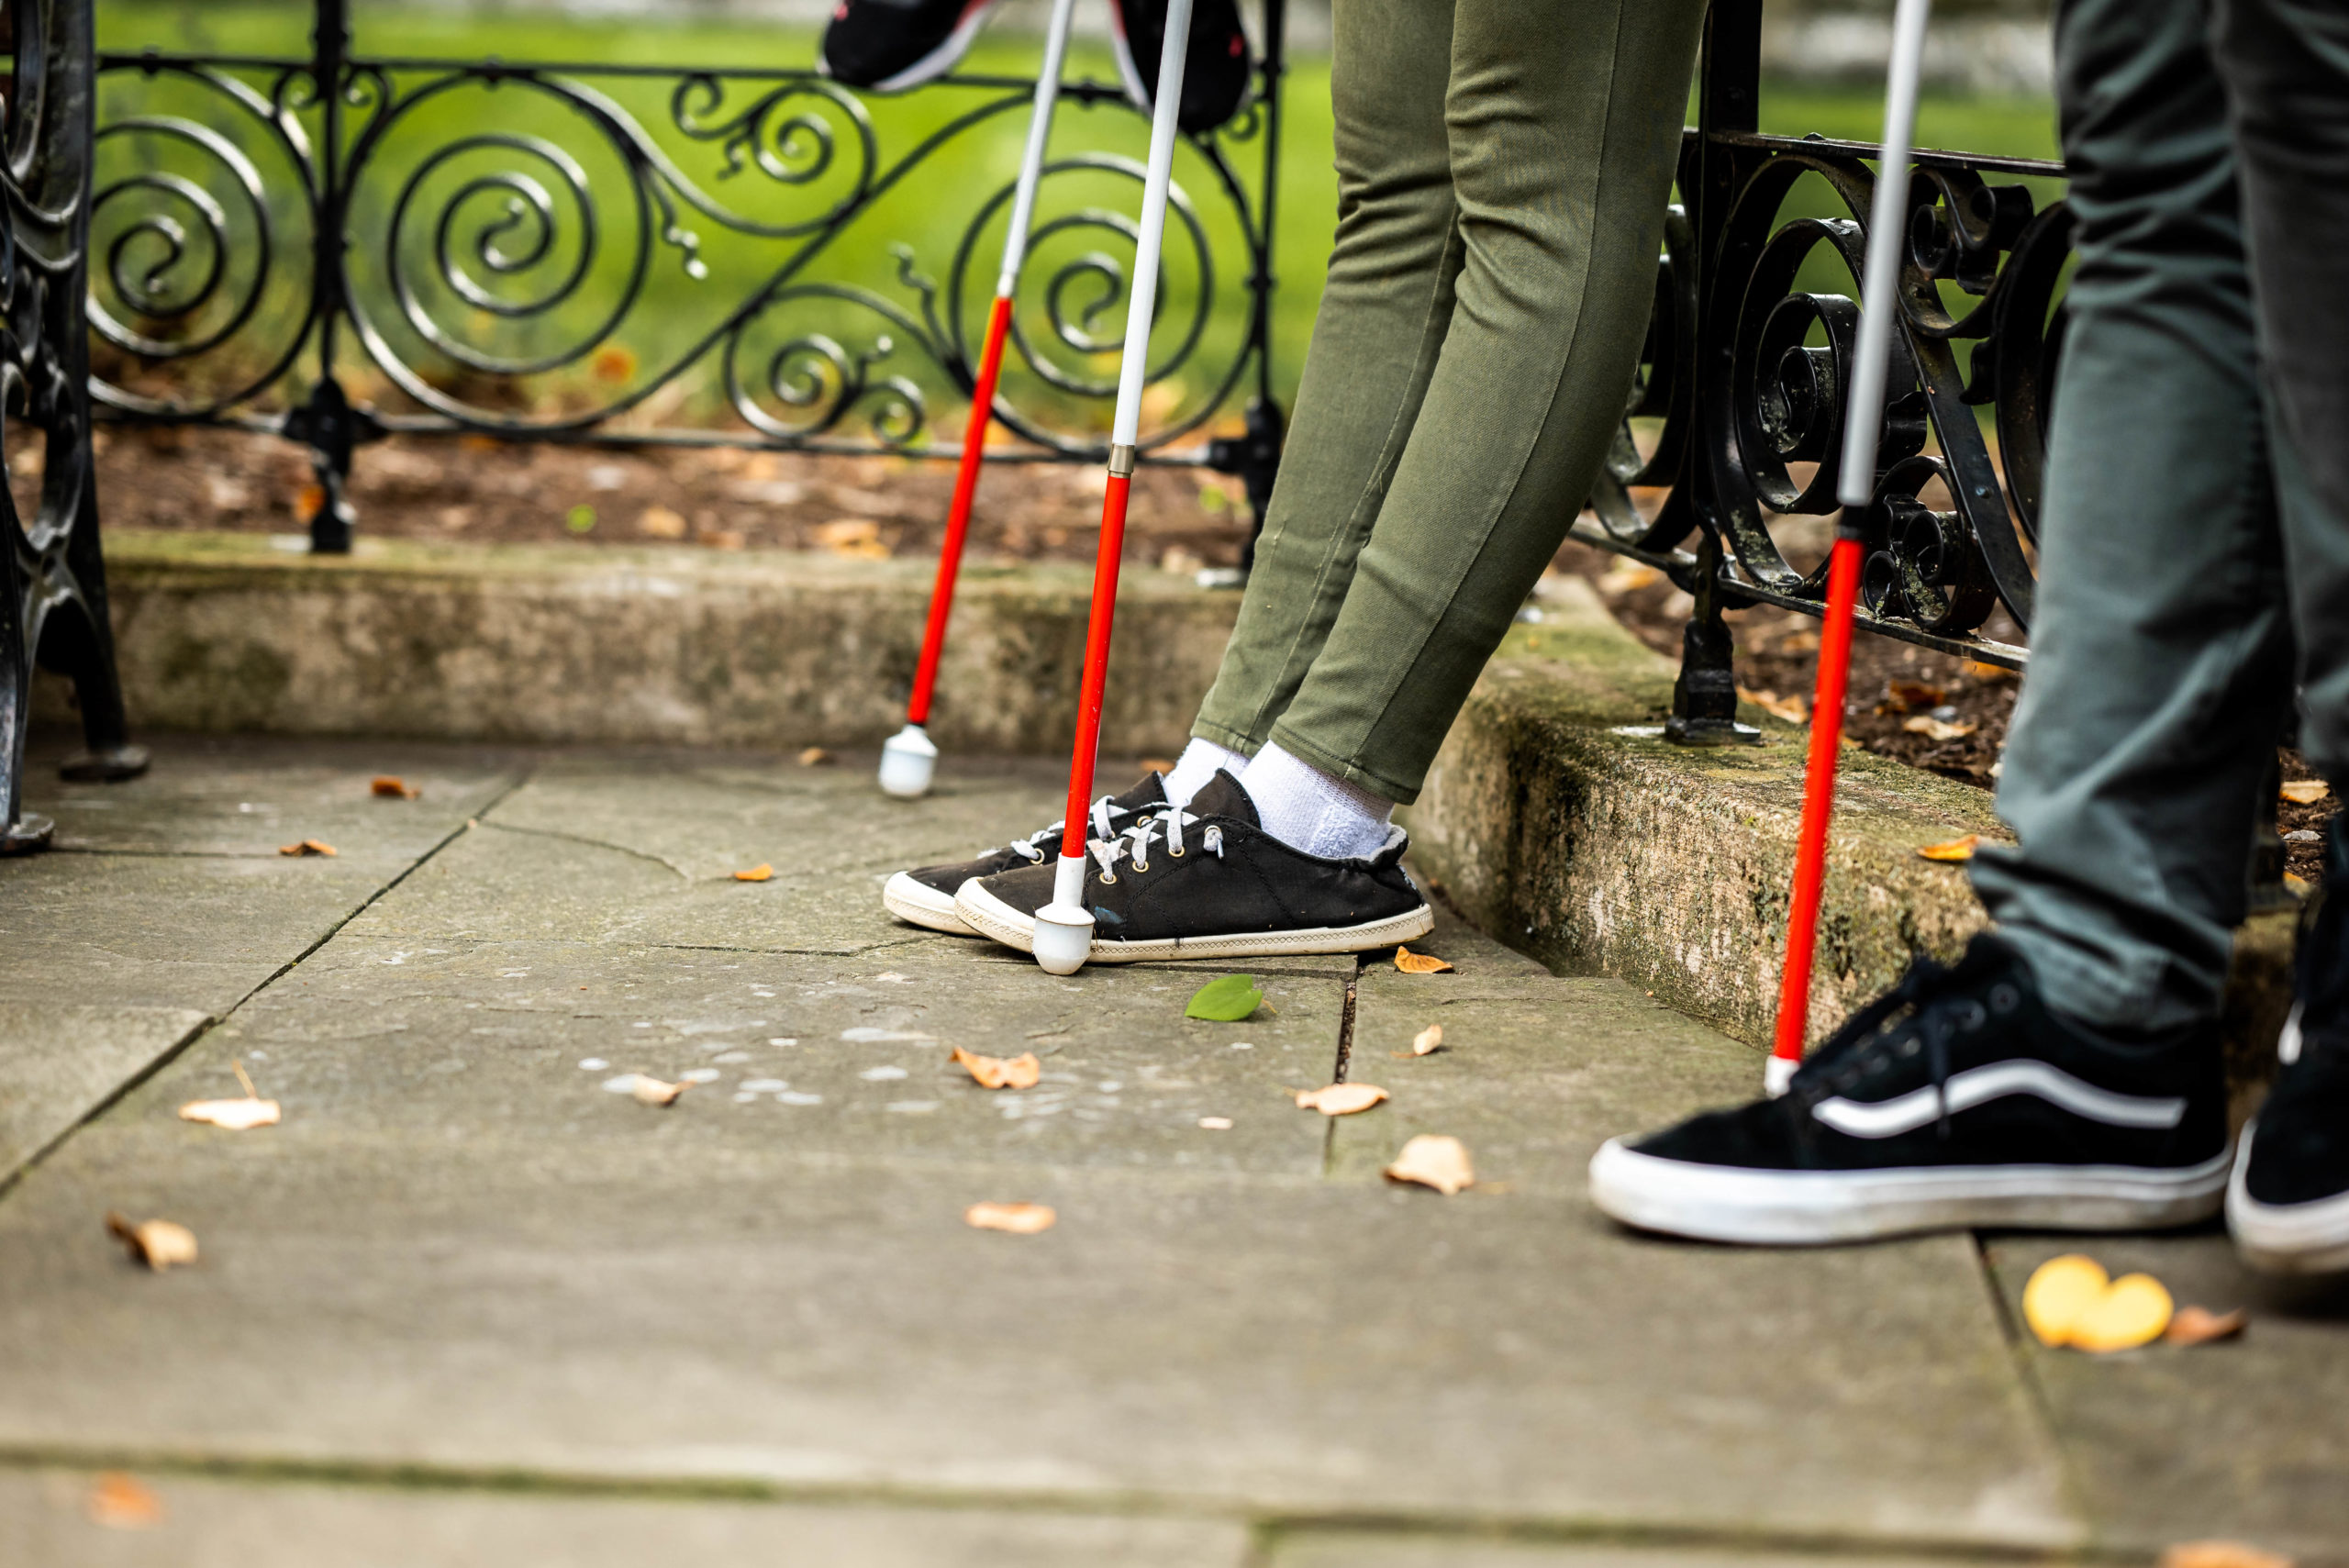 An artistic photo of two people's legs with white canes next to them